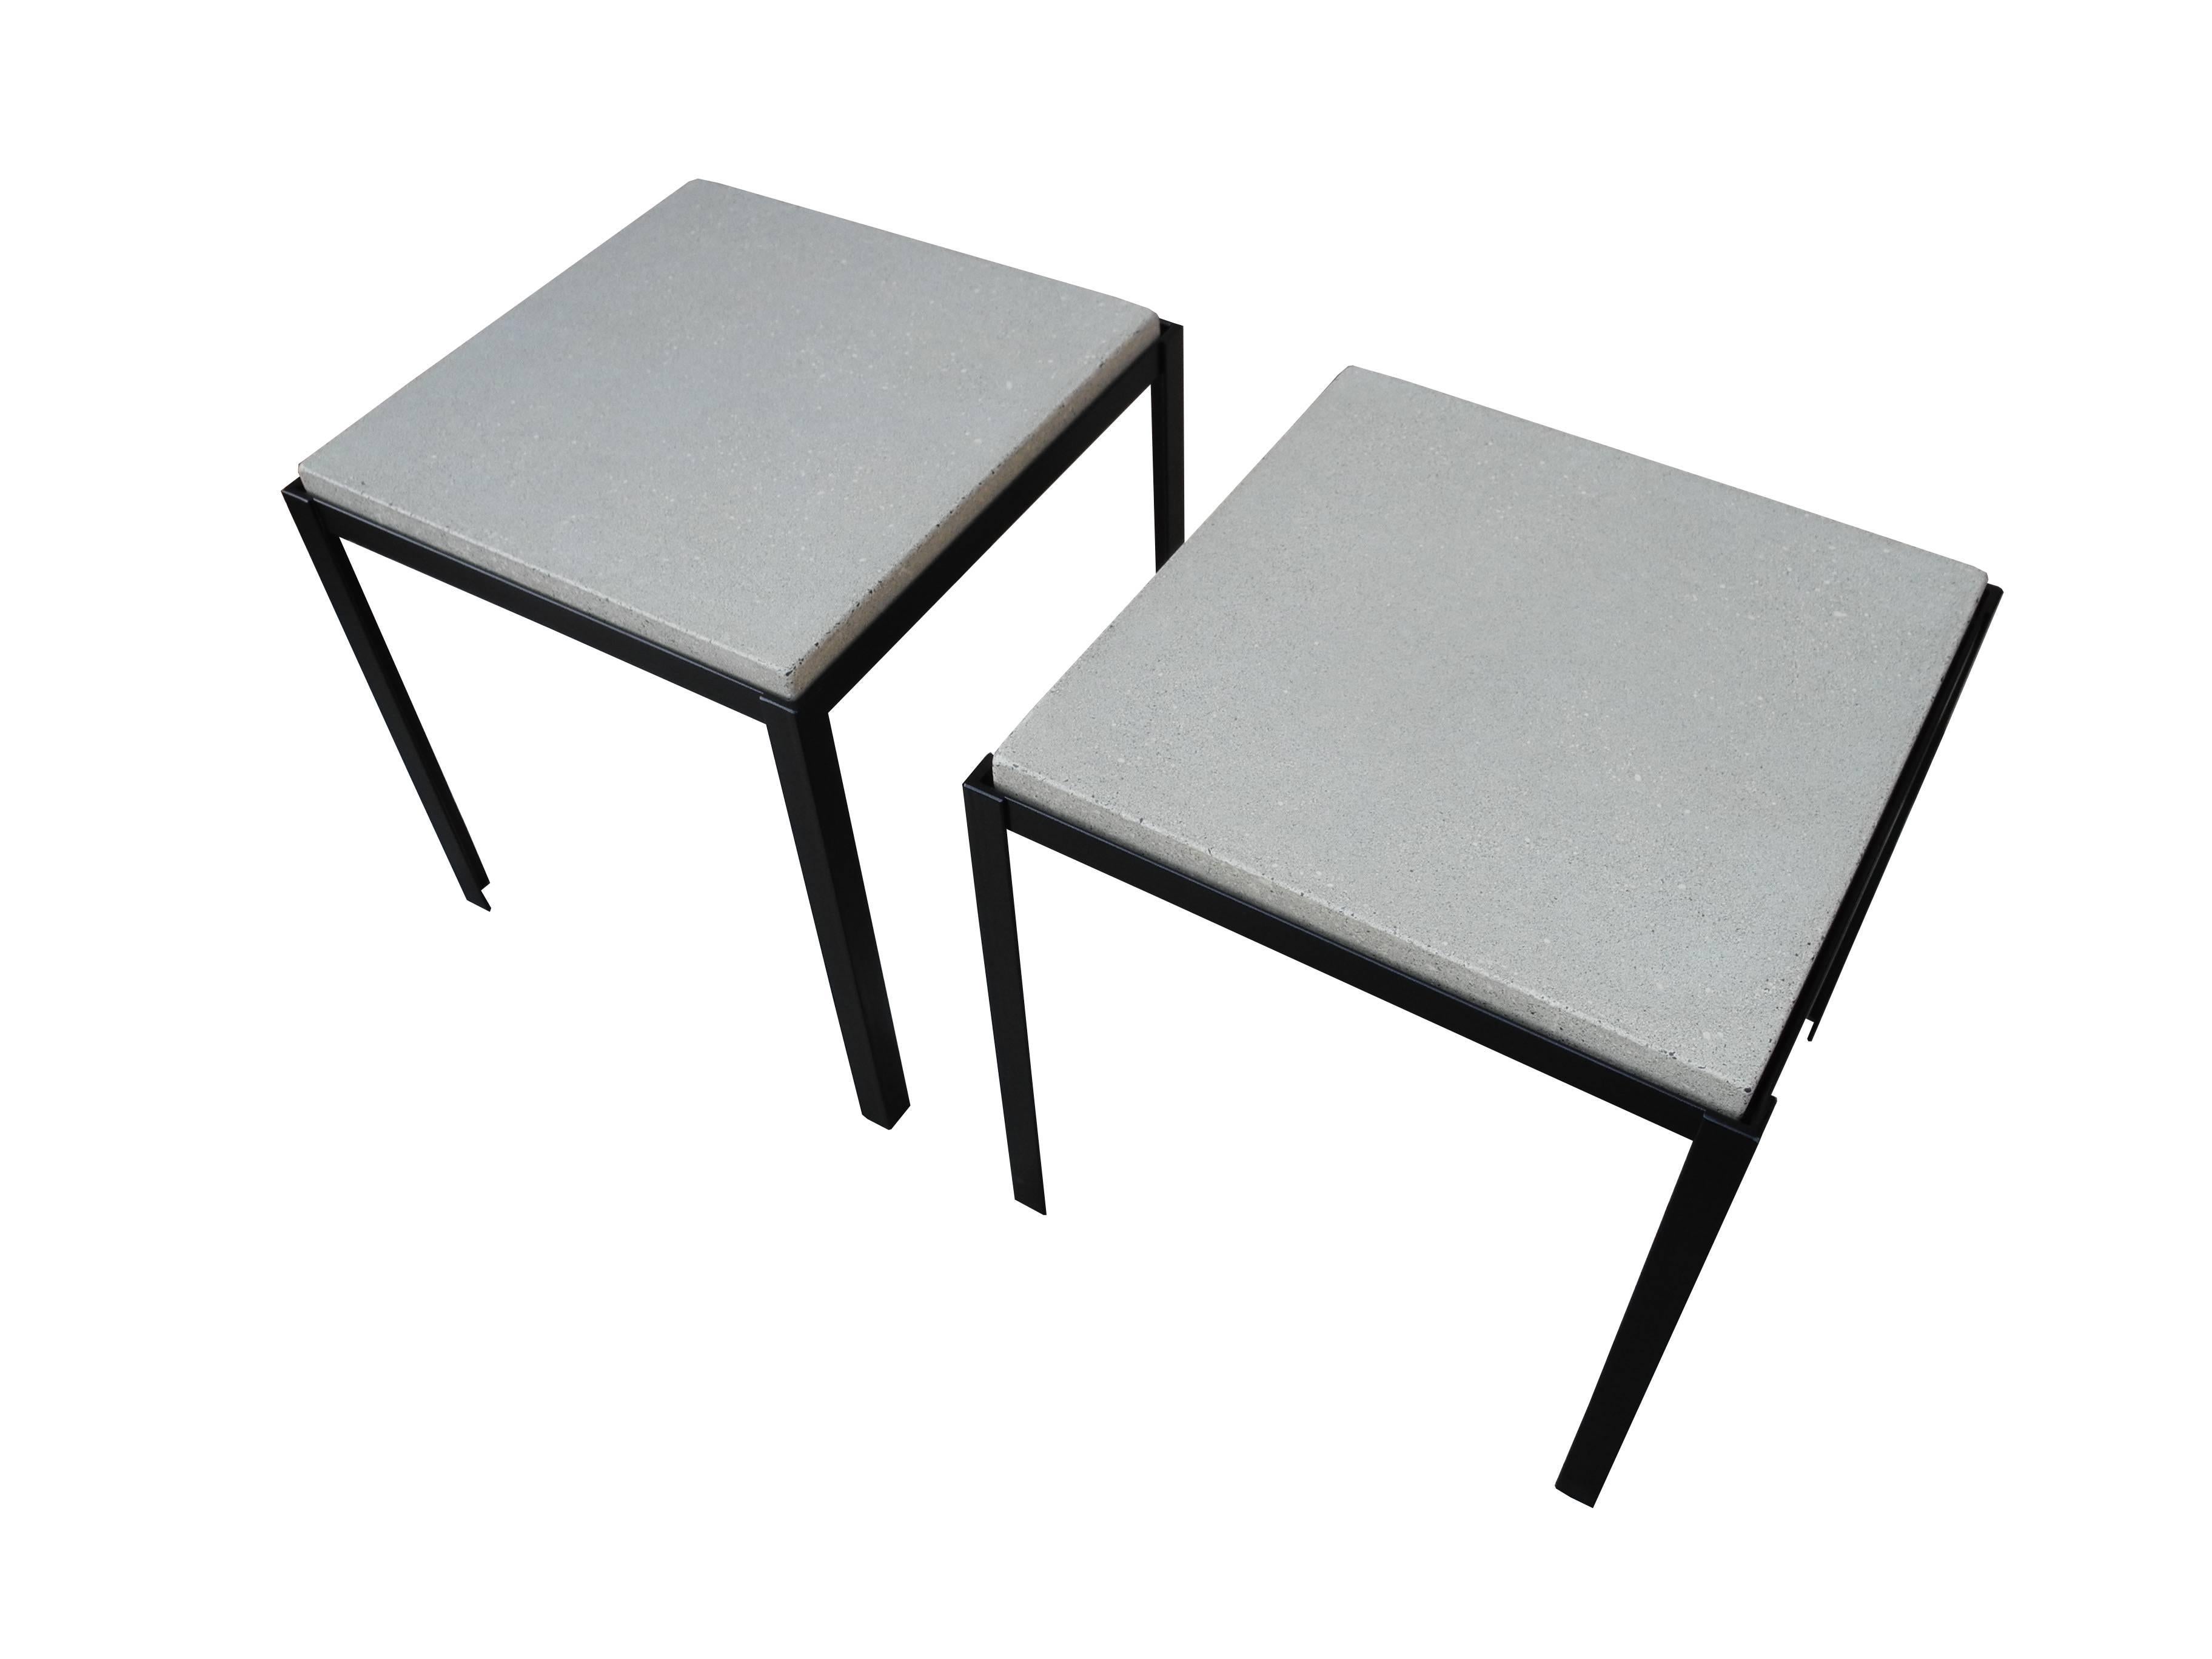 American Polished Concrete and Welded Steel Nightstands/Coffee Tables by Corinne Robbins For Sale